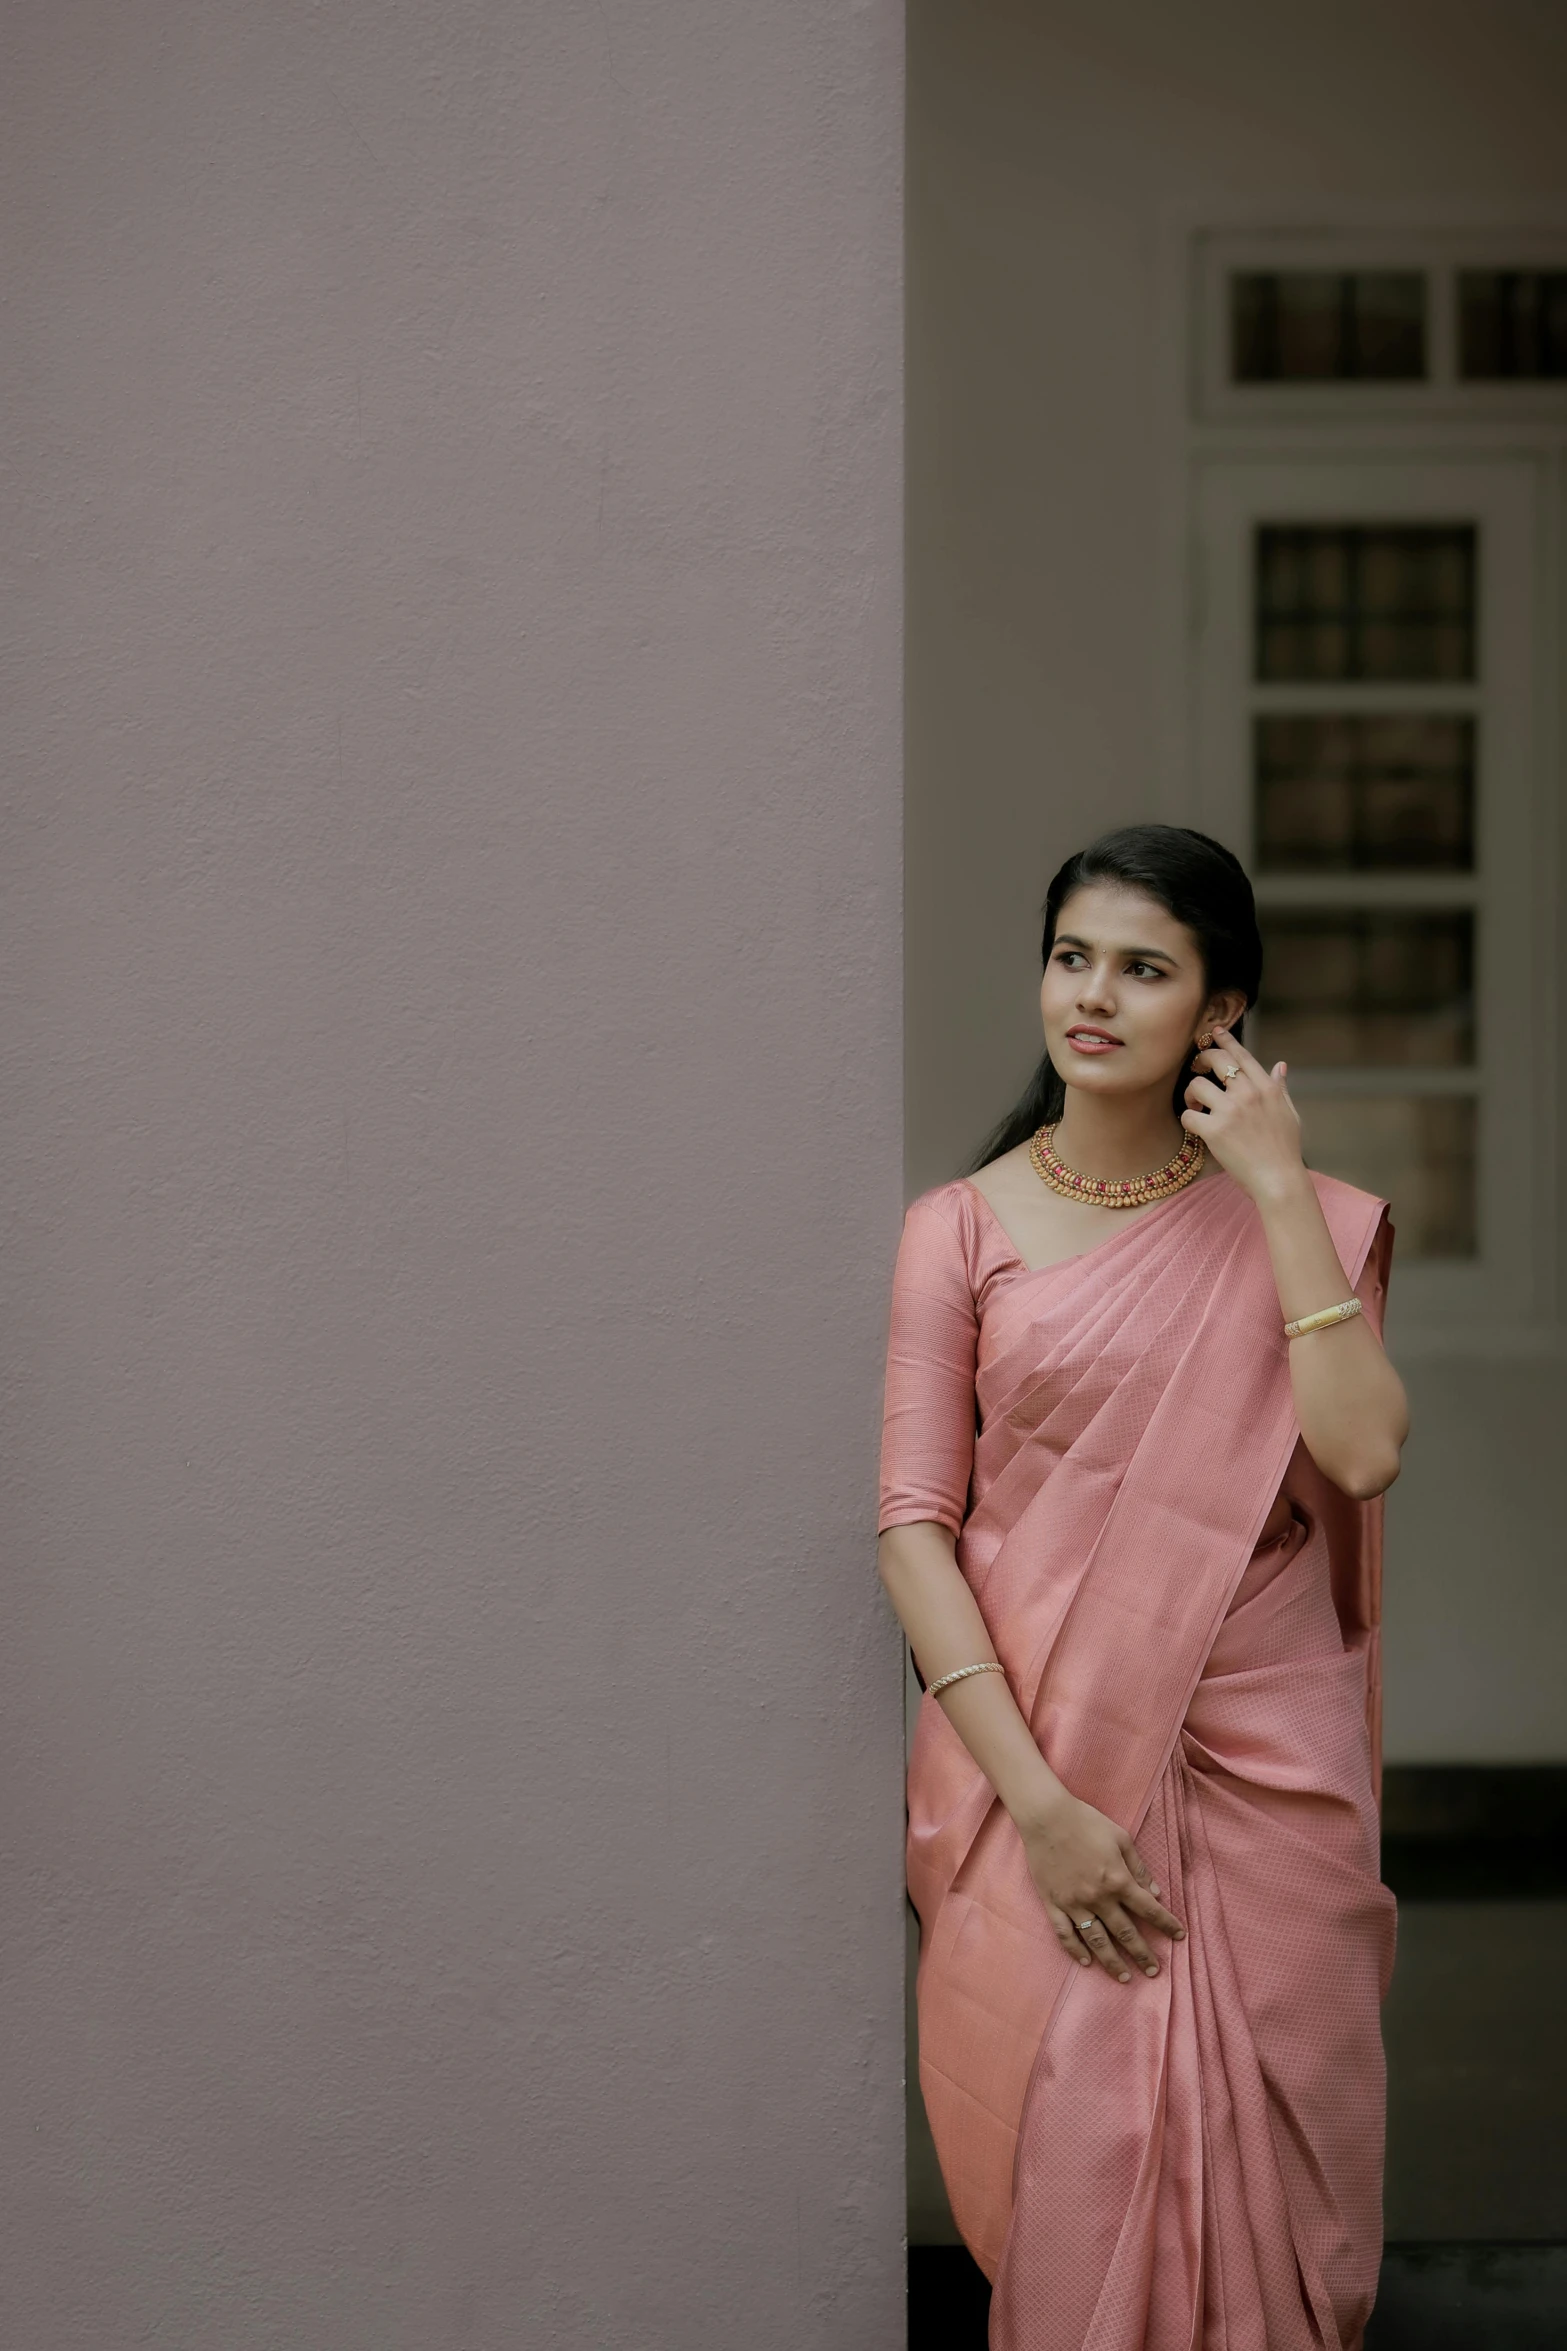 a young woman wearing a pink sari and holding a cell phone